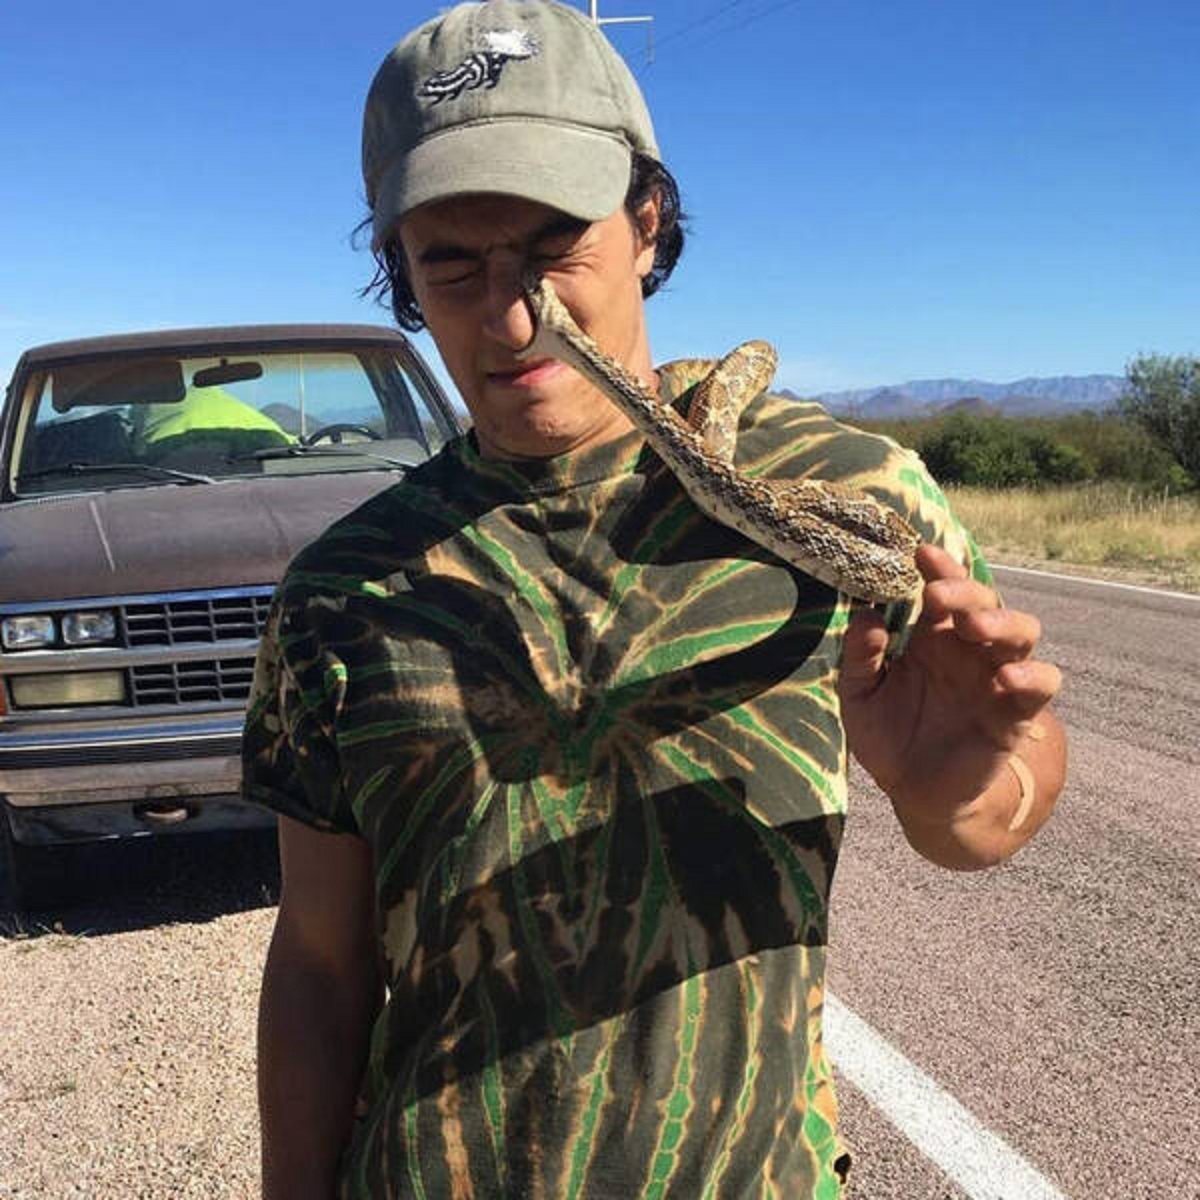 “WCGW if I take a picture with this gopher snake I found in the road?”